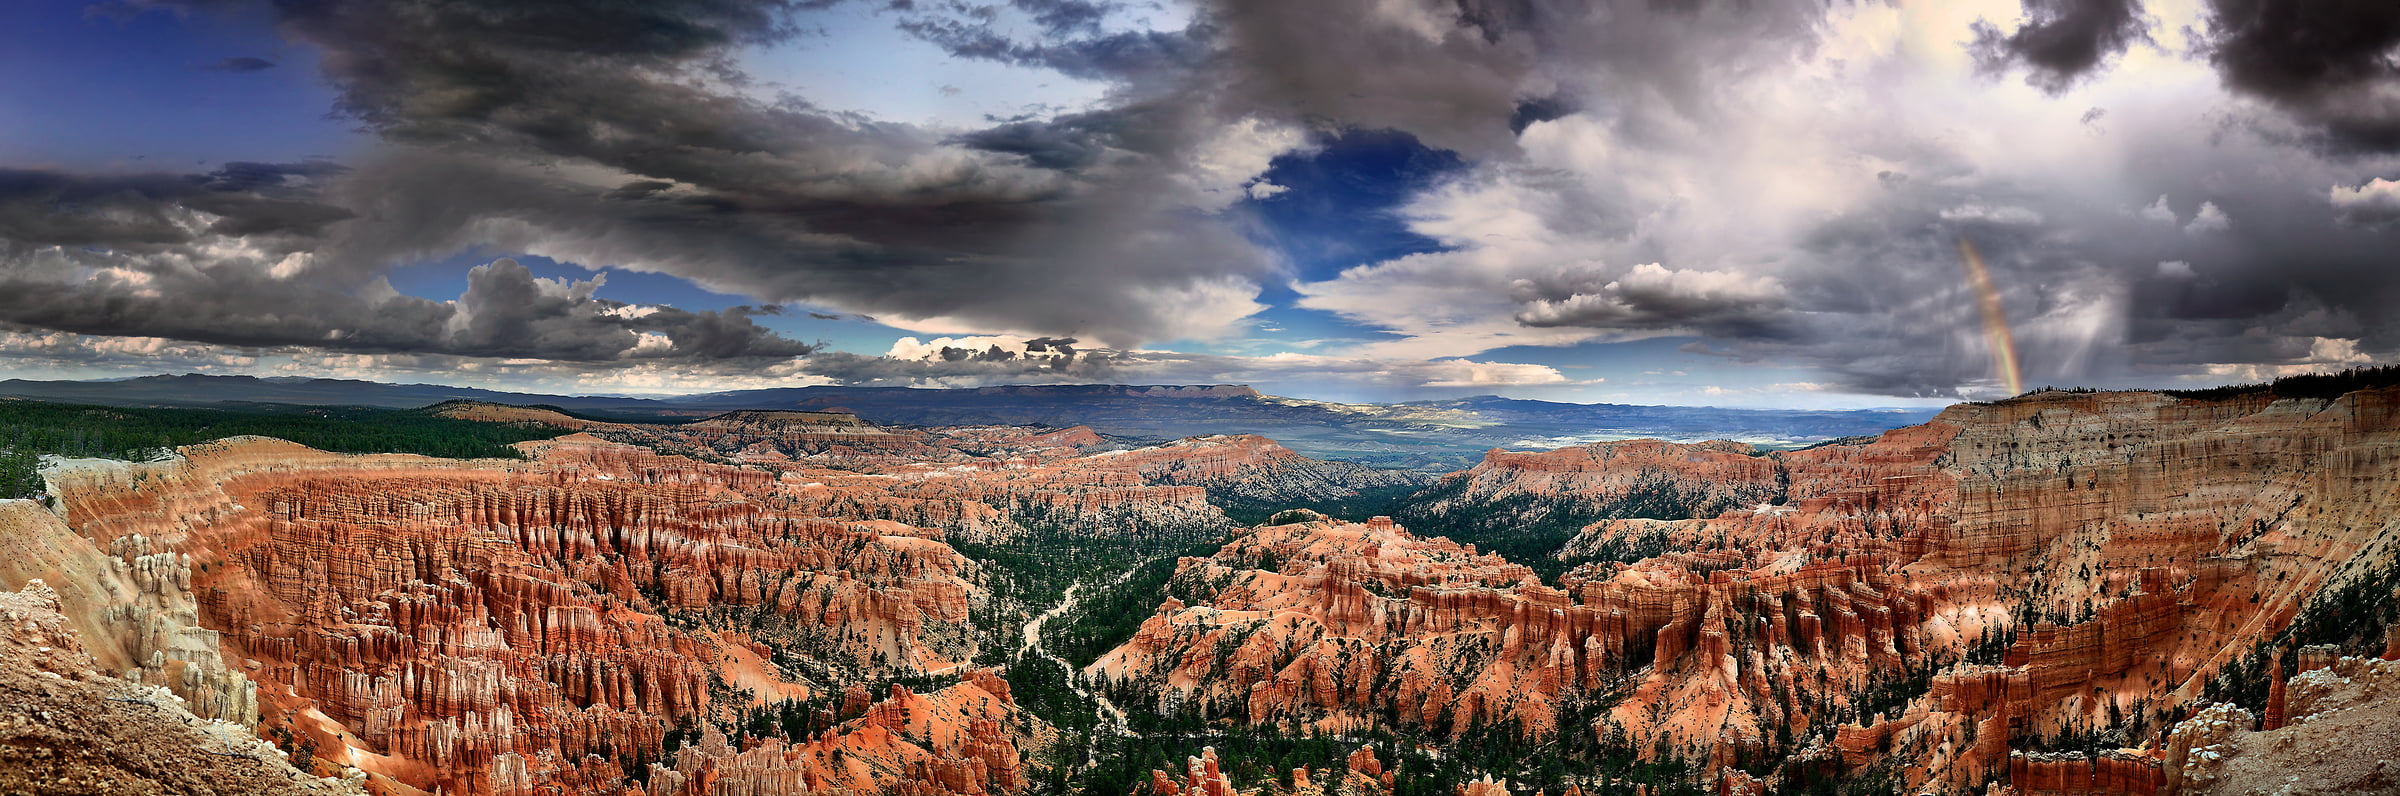 402 megapixels! A very high resolution panorama landscape photo of Bryce Canyon National Park with a rainbow; VAST photo created by Phil Crawshay in Bryce Canyon, Utah.